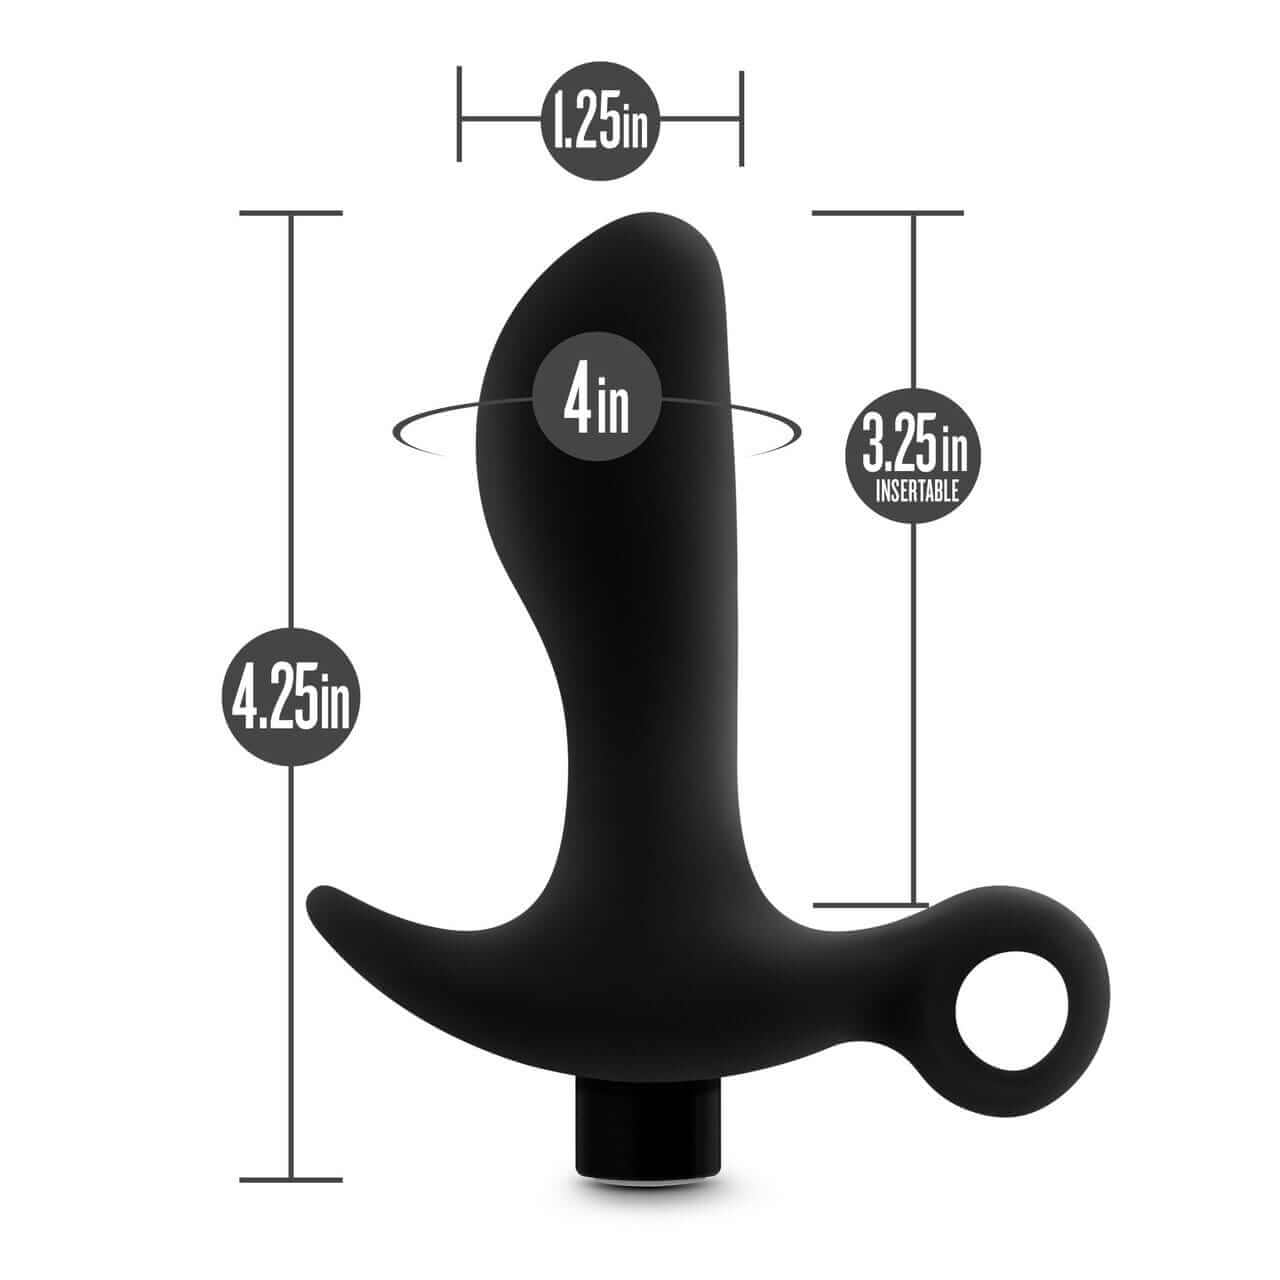 Silicone Vibrating Prostate Massager 01 - Black - Thorn & Feather